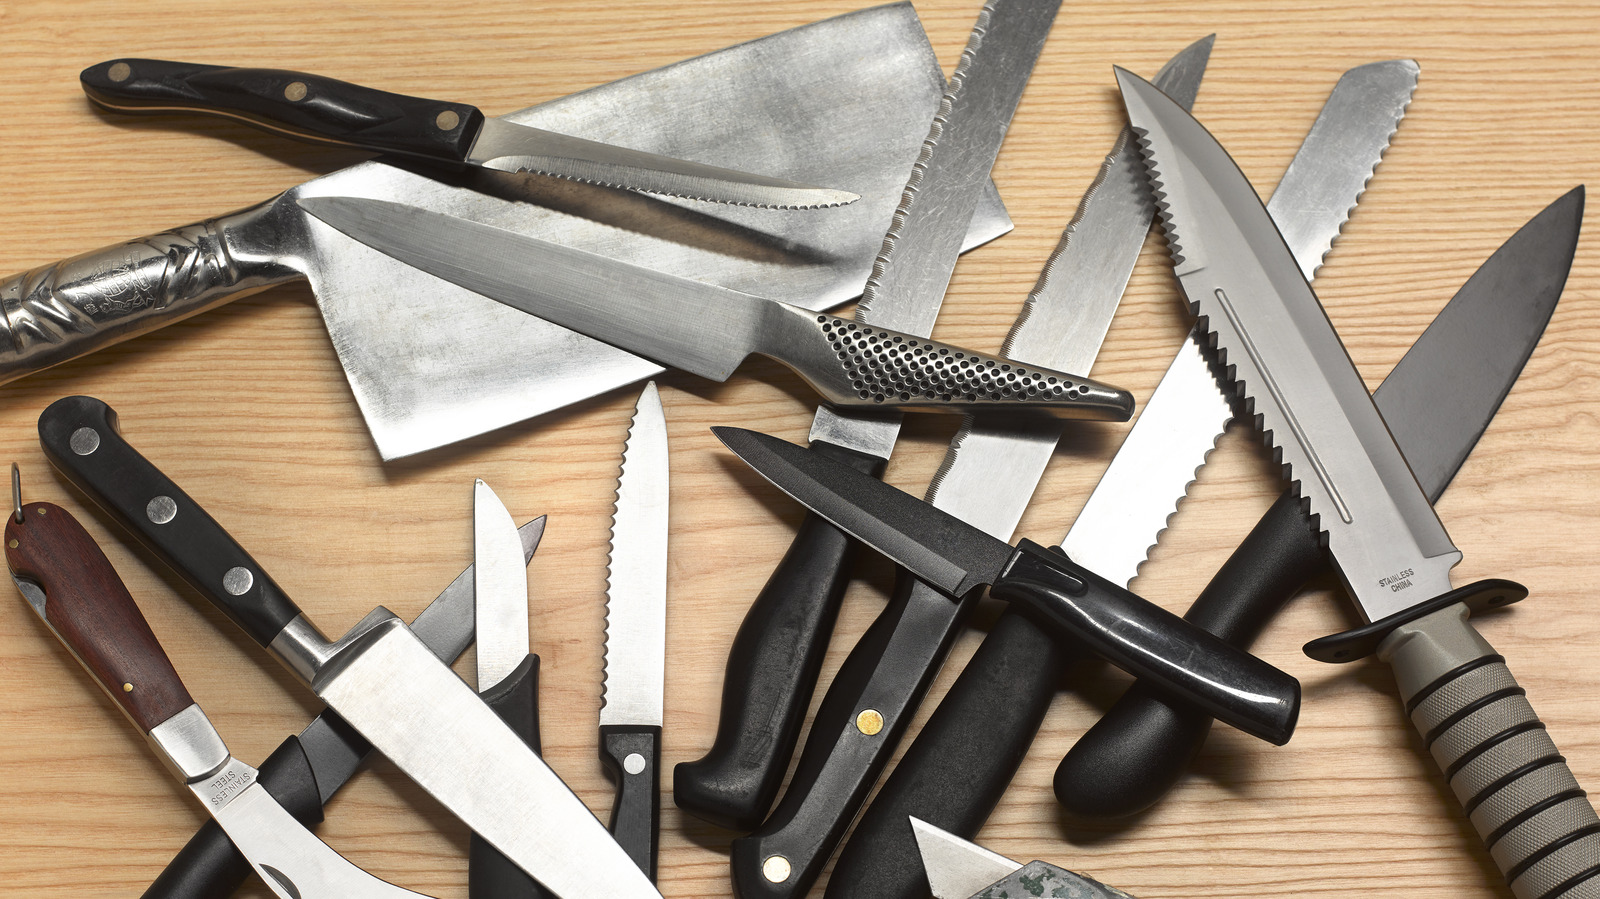 https://www.mashed.com/img/gallery/heres-how-many-kitchen-knives-you-actually-need/l-intro-1620092932.jpg